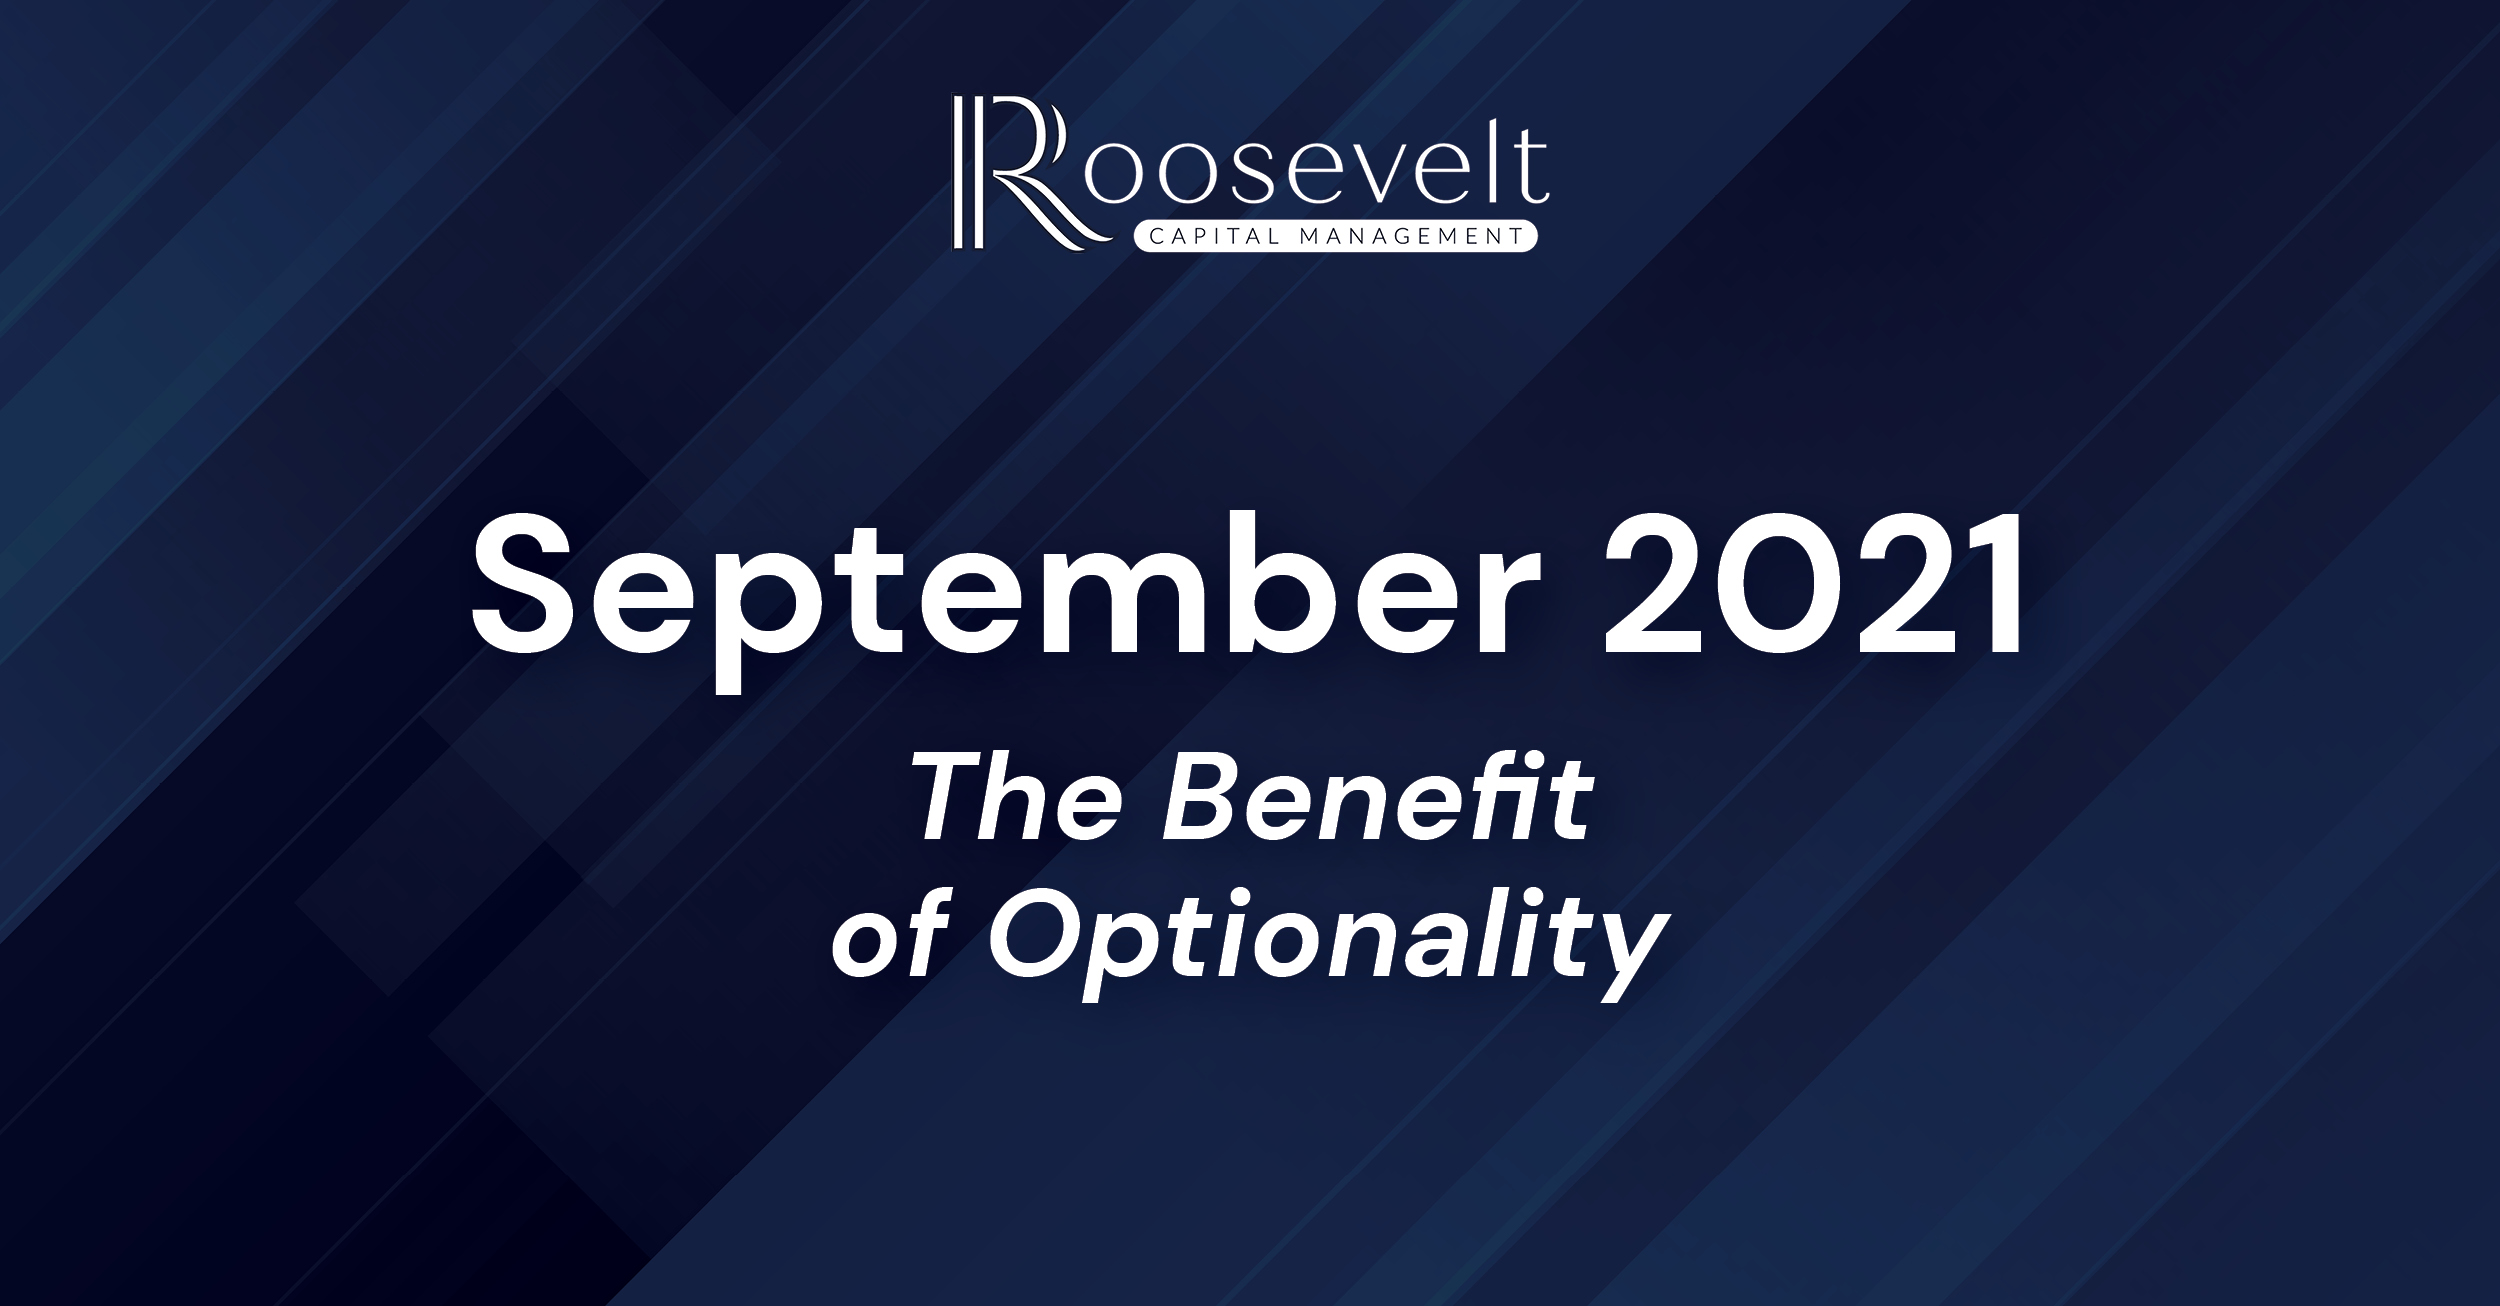 September 2021 - The Benefit of Optionality